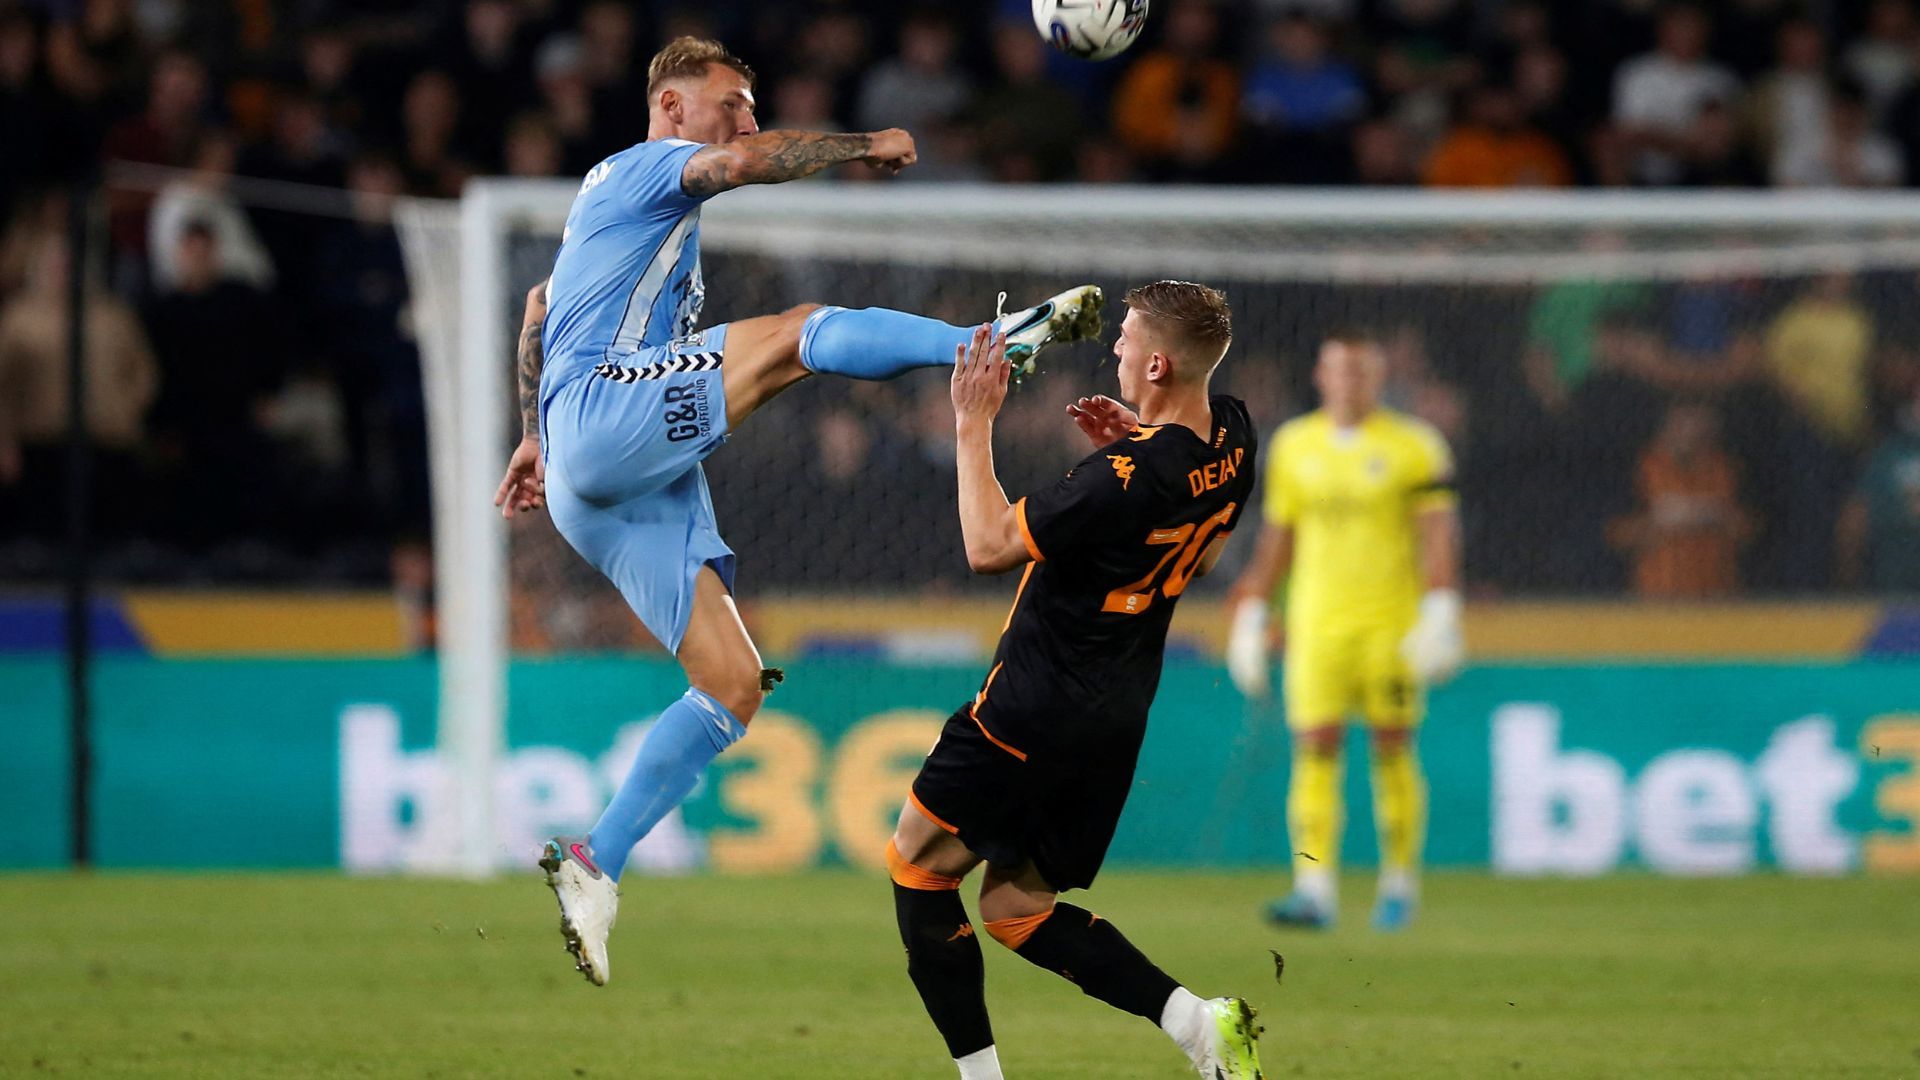 Liam Delap meets Kyle McFadzean in Hull City's 1-1 Coventry City draw